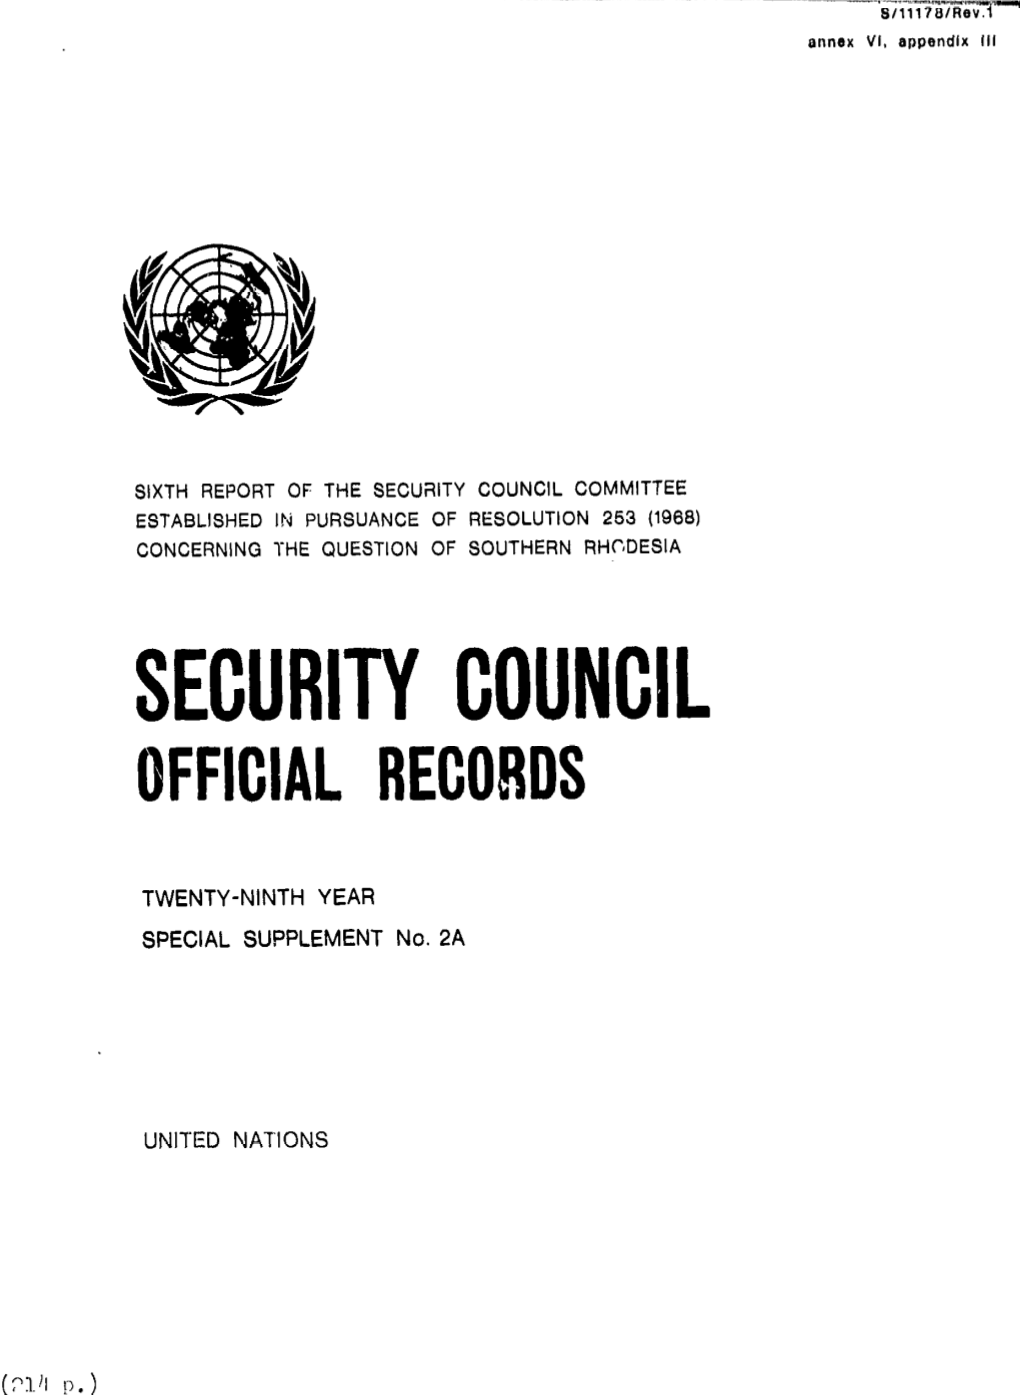 SECURITY COUNCIL COMMITTEE ESTABLISHED in PURSUANCE of RESOLUTION 253 (1968) CONCERNING the QUESTION of SOUTHERN Rhcldesia SECURITYCOUNCIL OFFICIALRECORDS